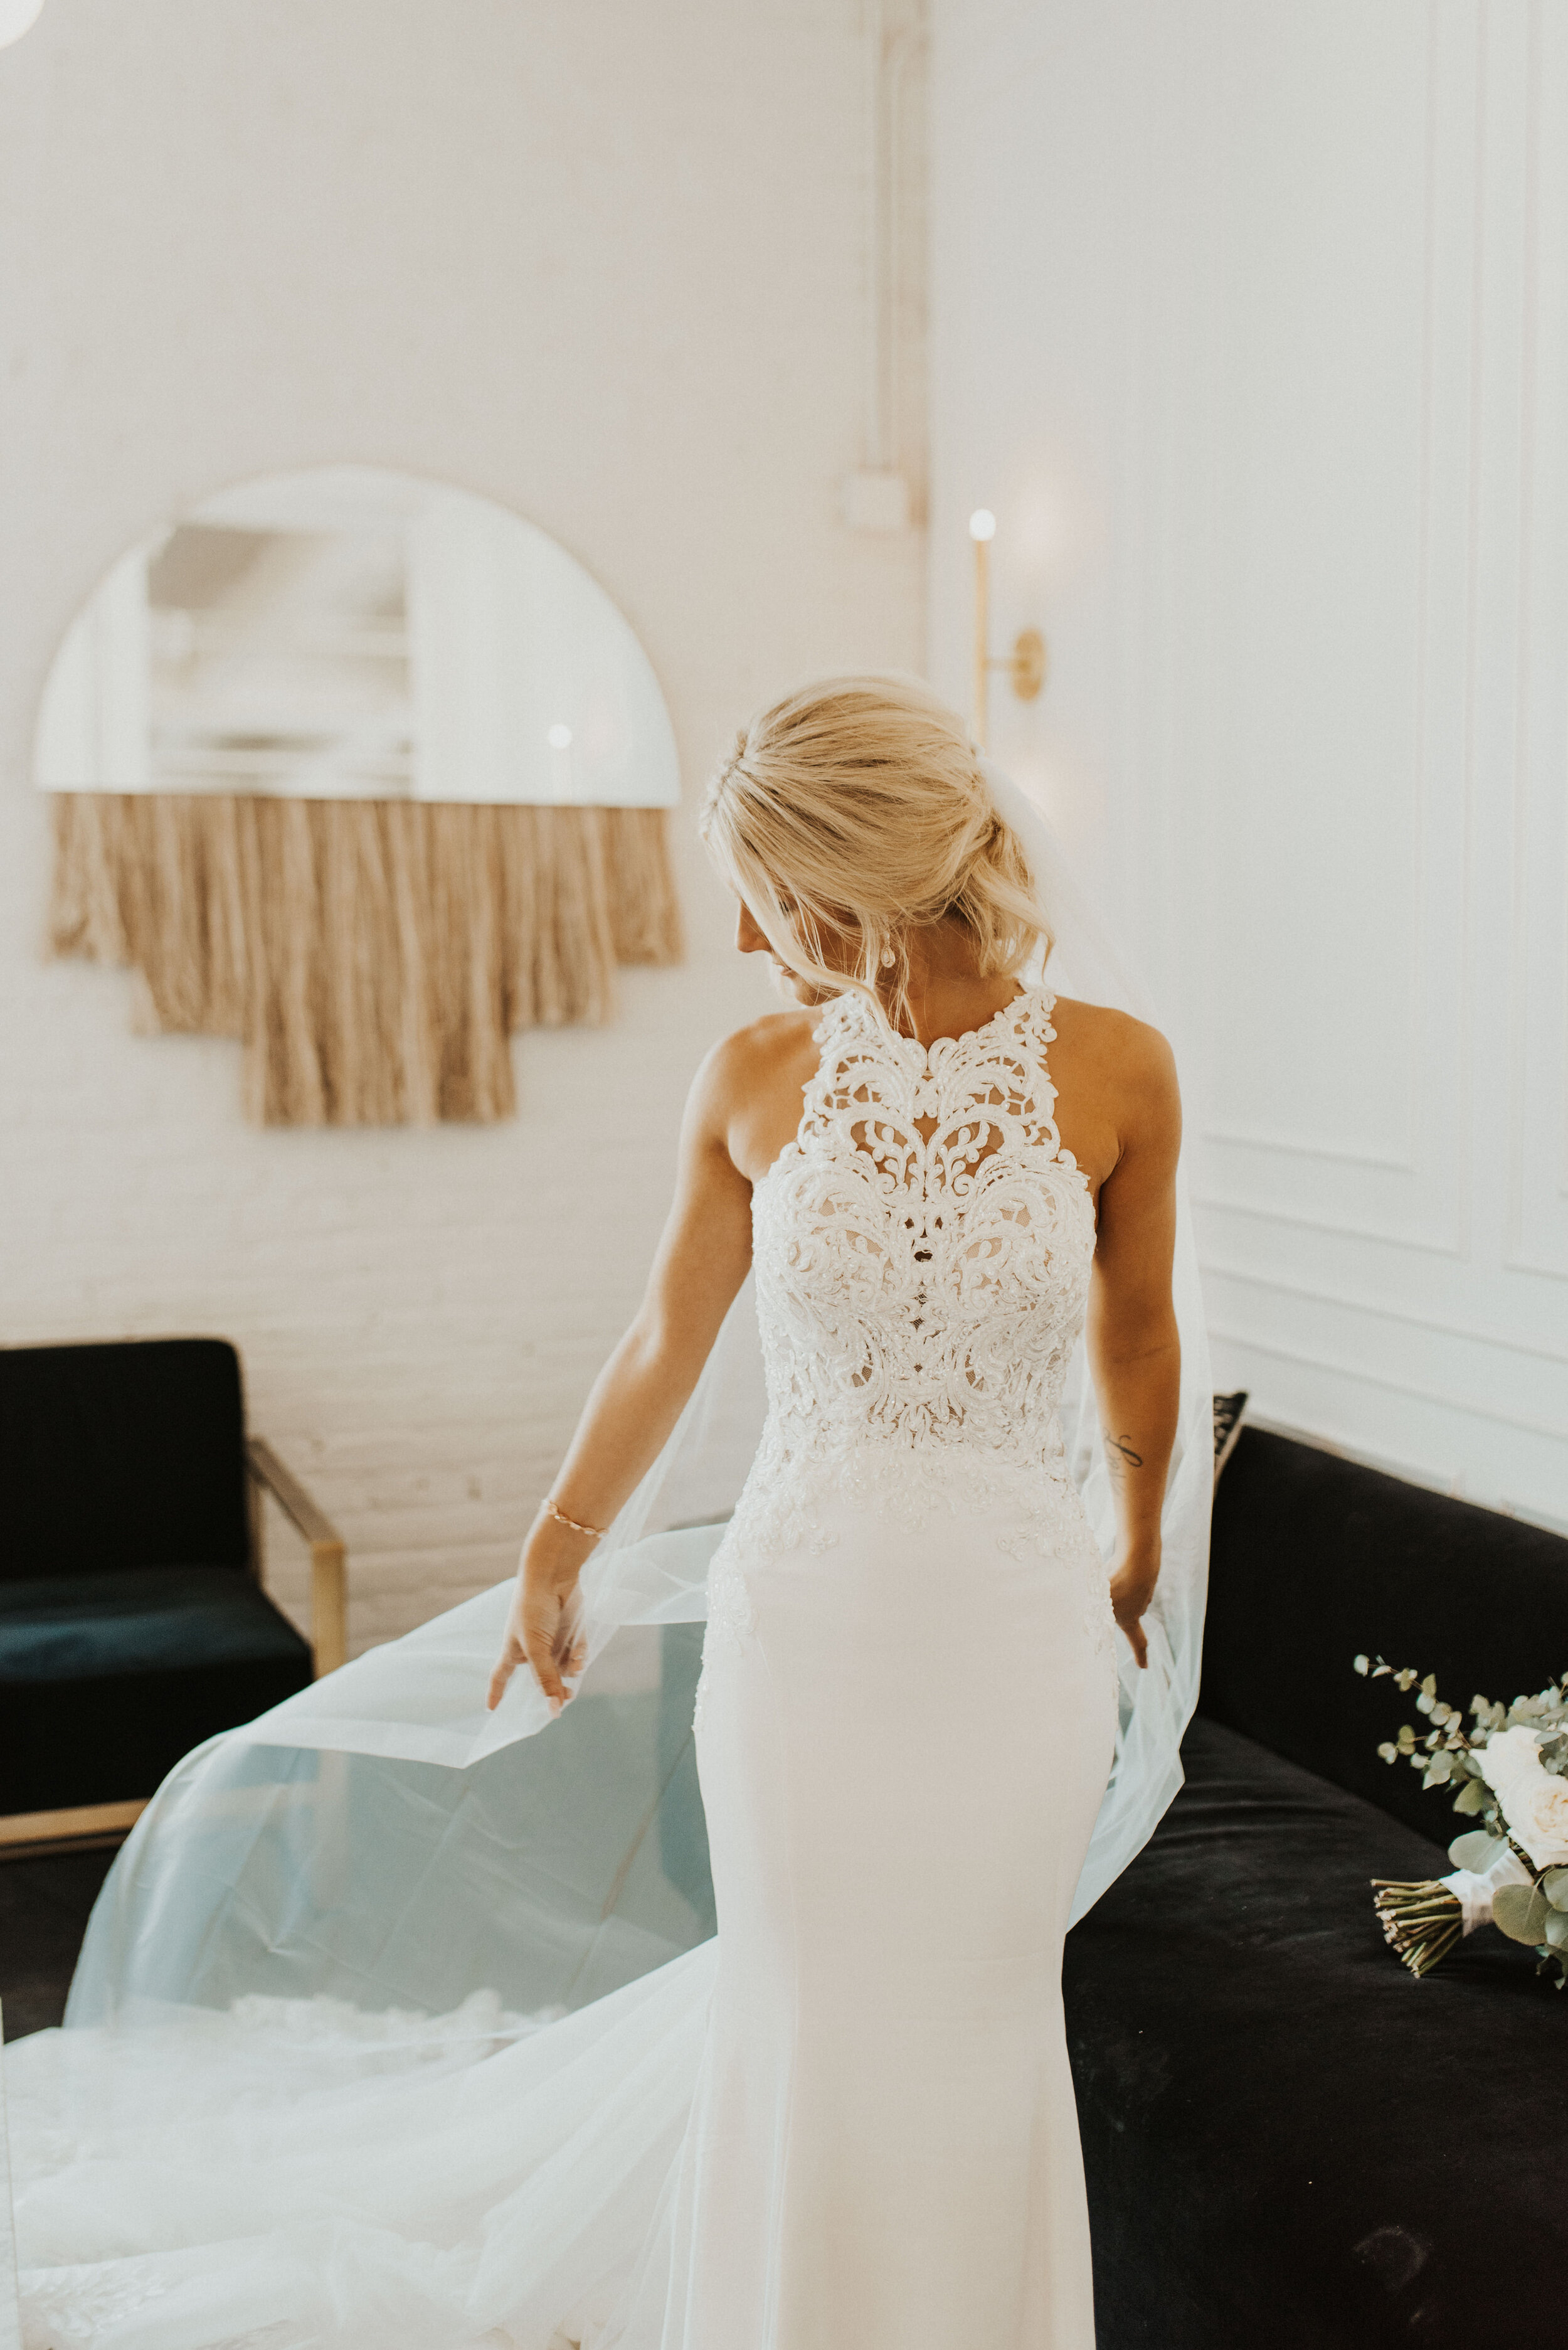 Lace wedding dress: Modern, Yet Classic Fall Wedding at Company 251 featured on CHI thee WED